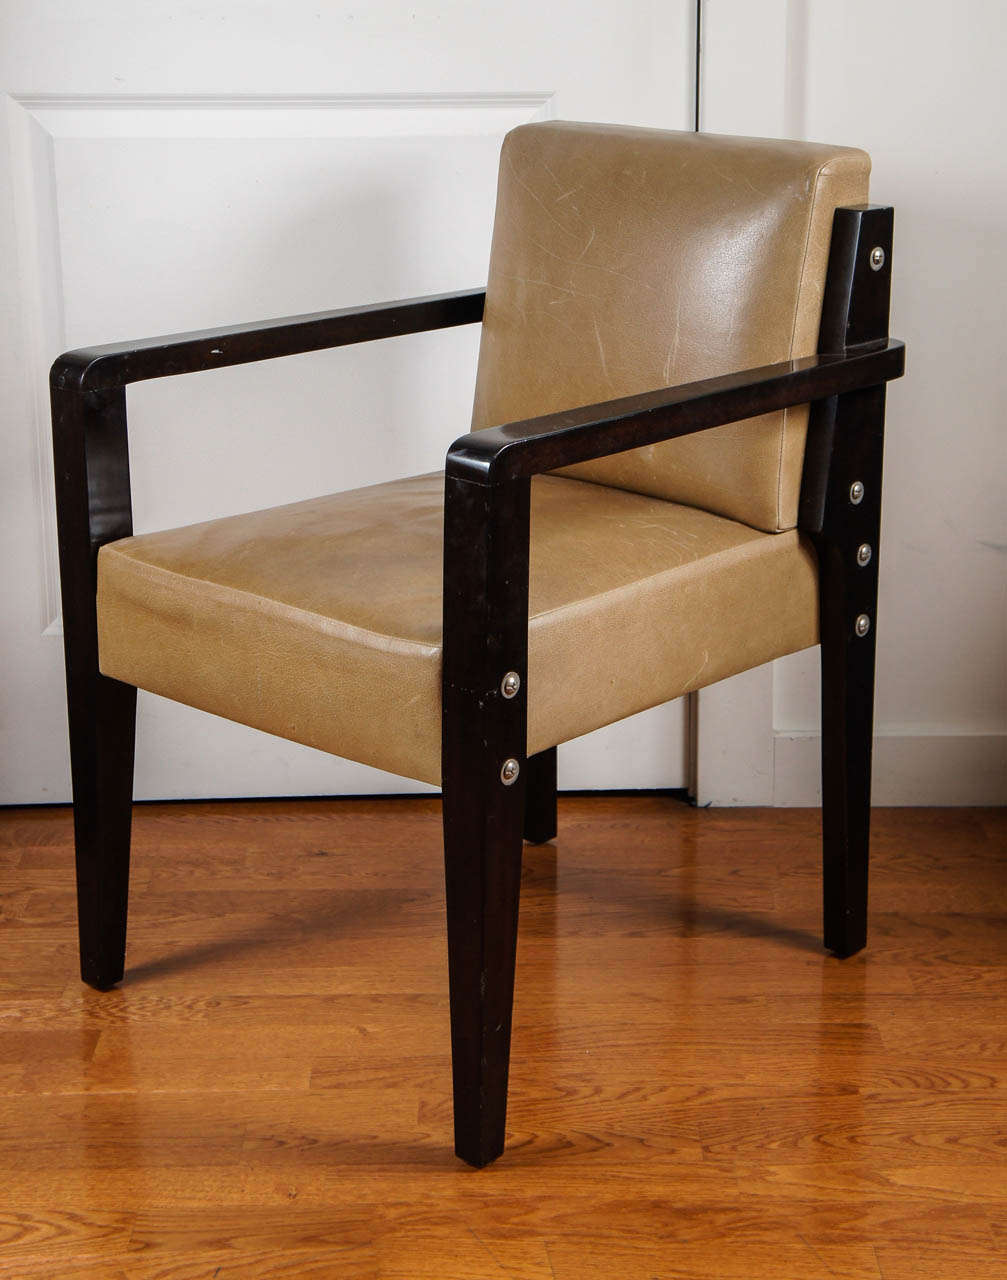 in the manner of Paul Dupre-Lafron, this handsome armed dining chair is upholstered in tan leather, with silver nail-heads, detailing, the mahogany wood frame.
a quantity of 10 are available.